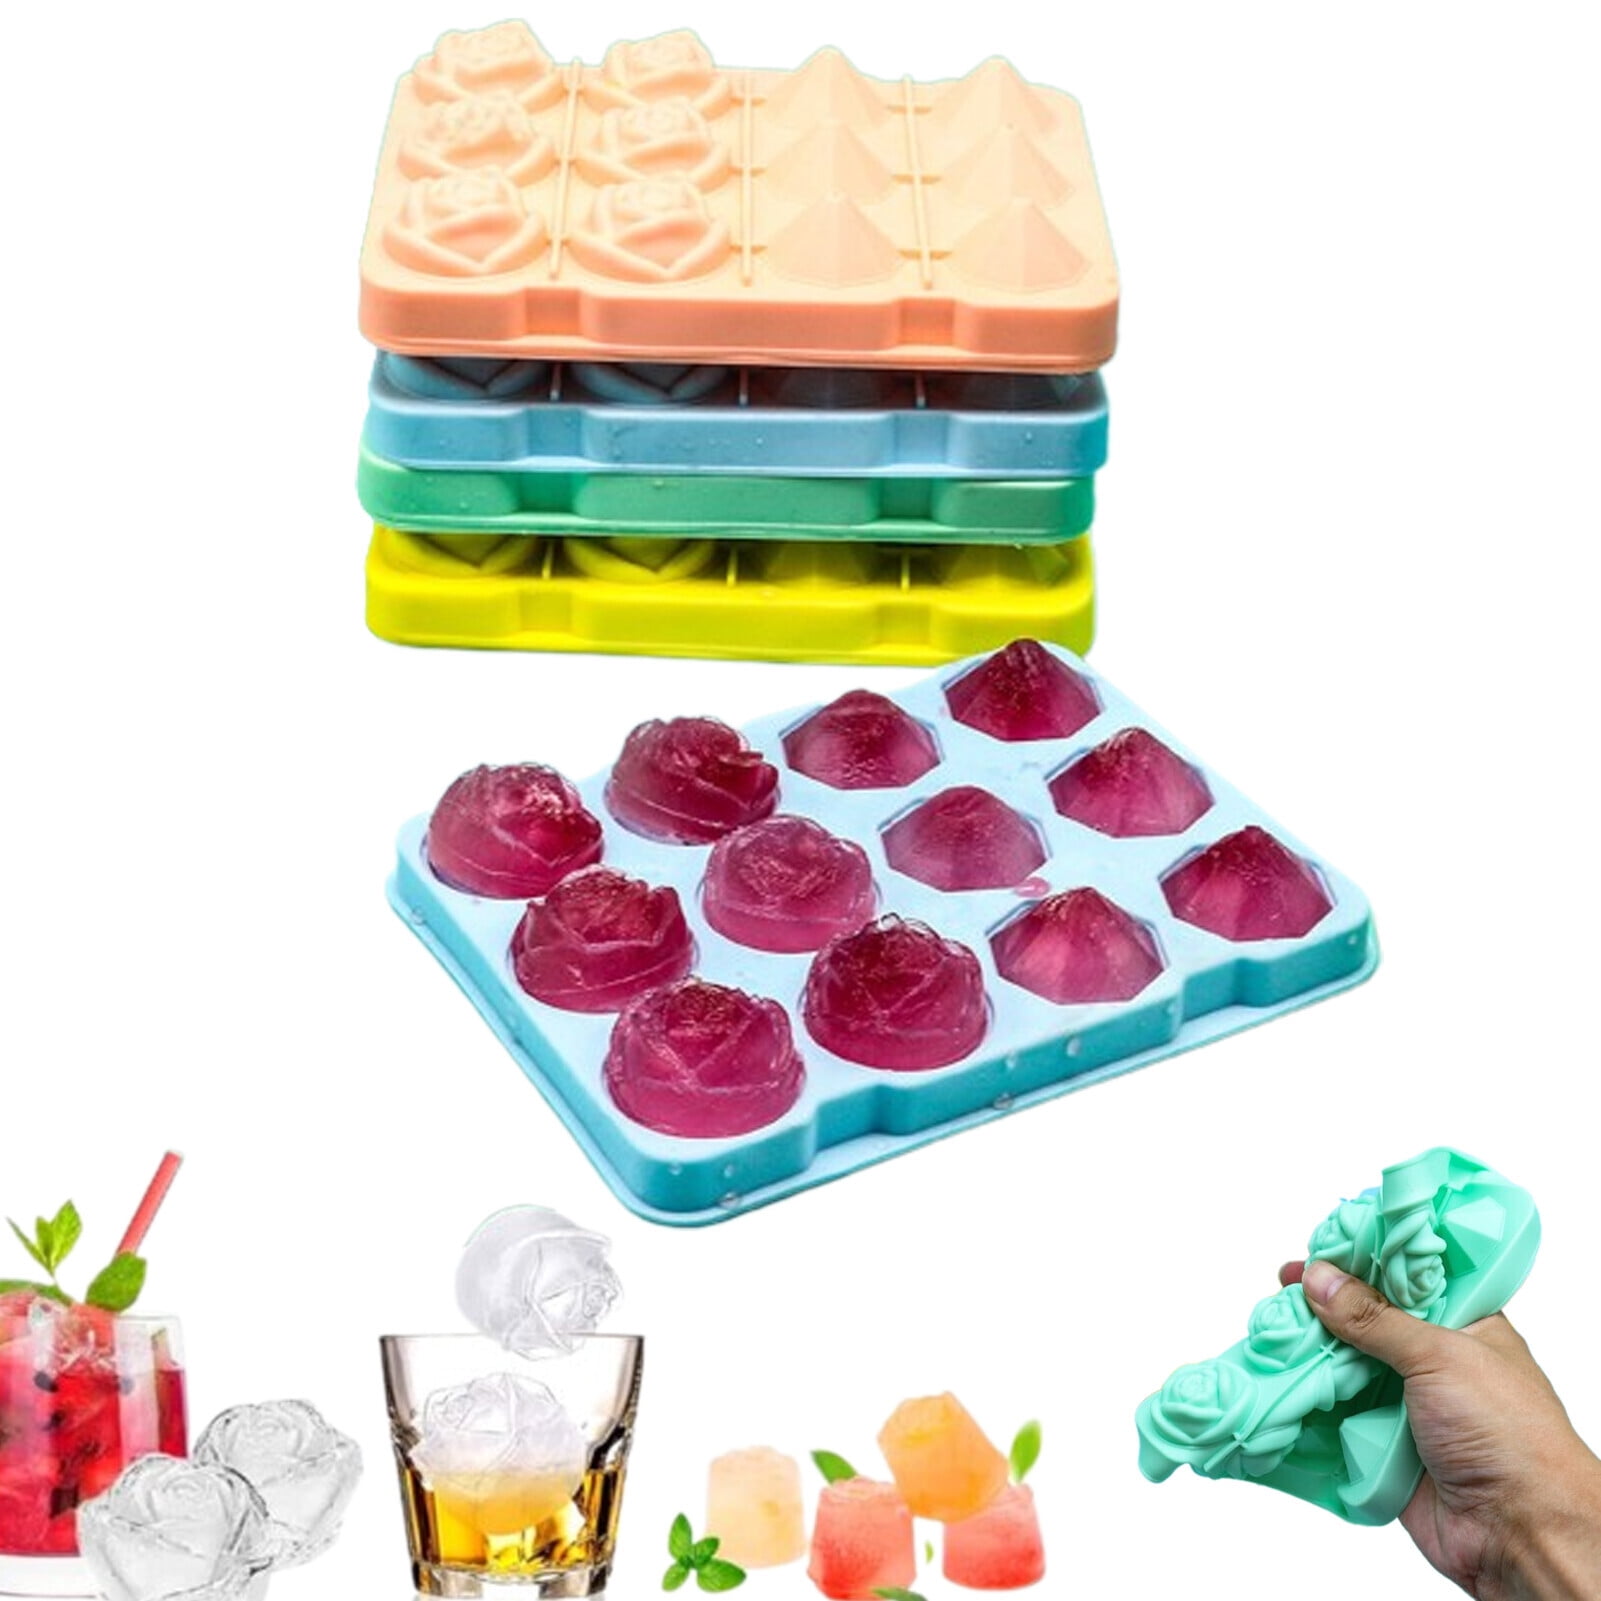 2 in 1, Aidacom Diamond Rose Ice Molds & Large Ice Cube Trays, Giant Fancy  Shape Ice, 17 Big Square Ice, Silicone Rubber Funny Cool Ice Ball Maker for